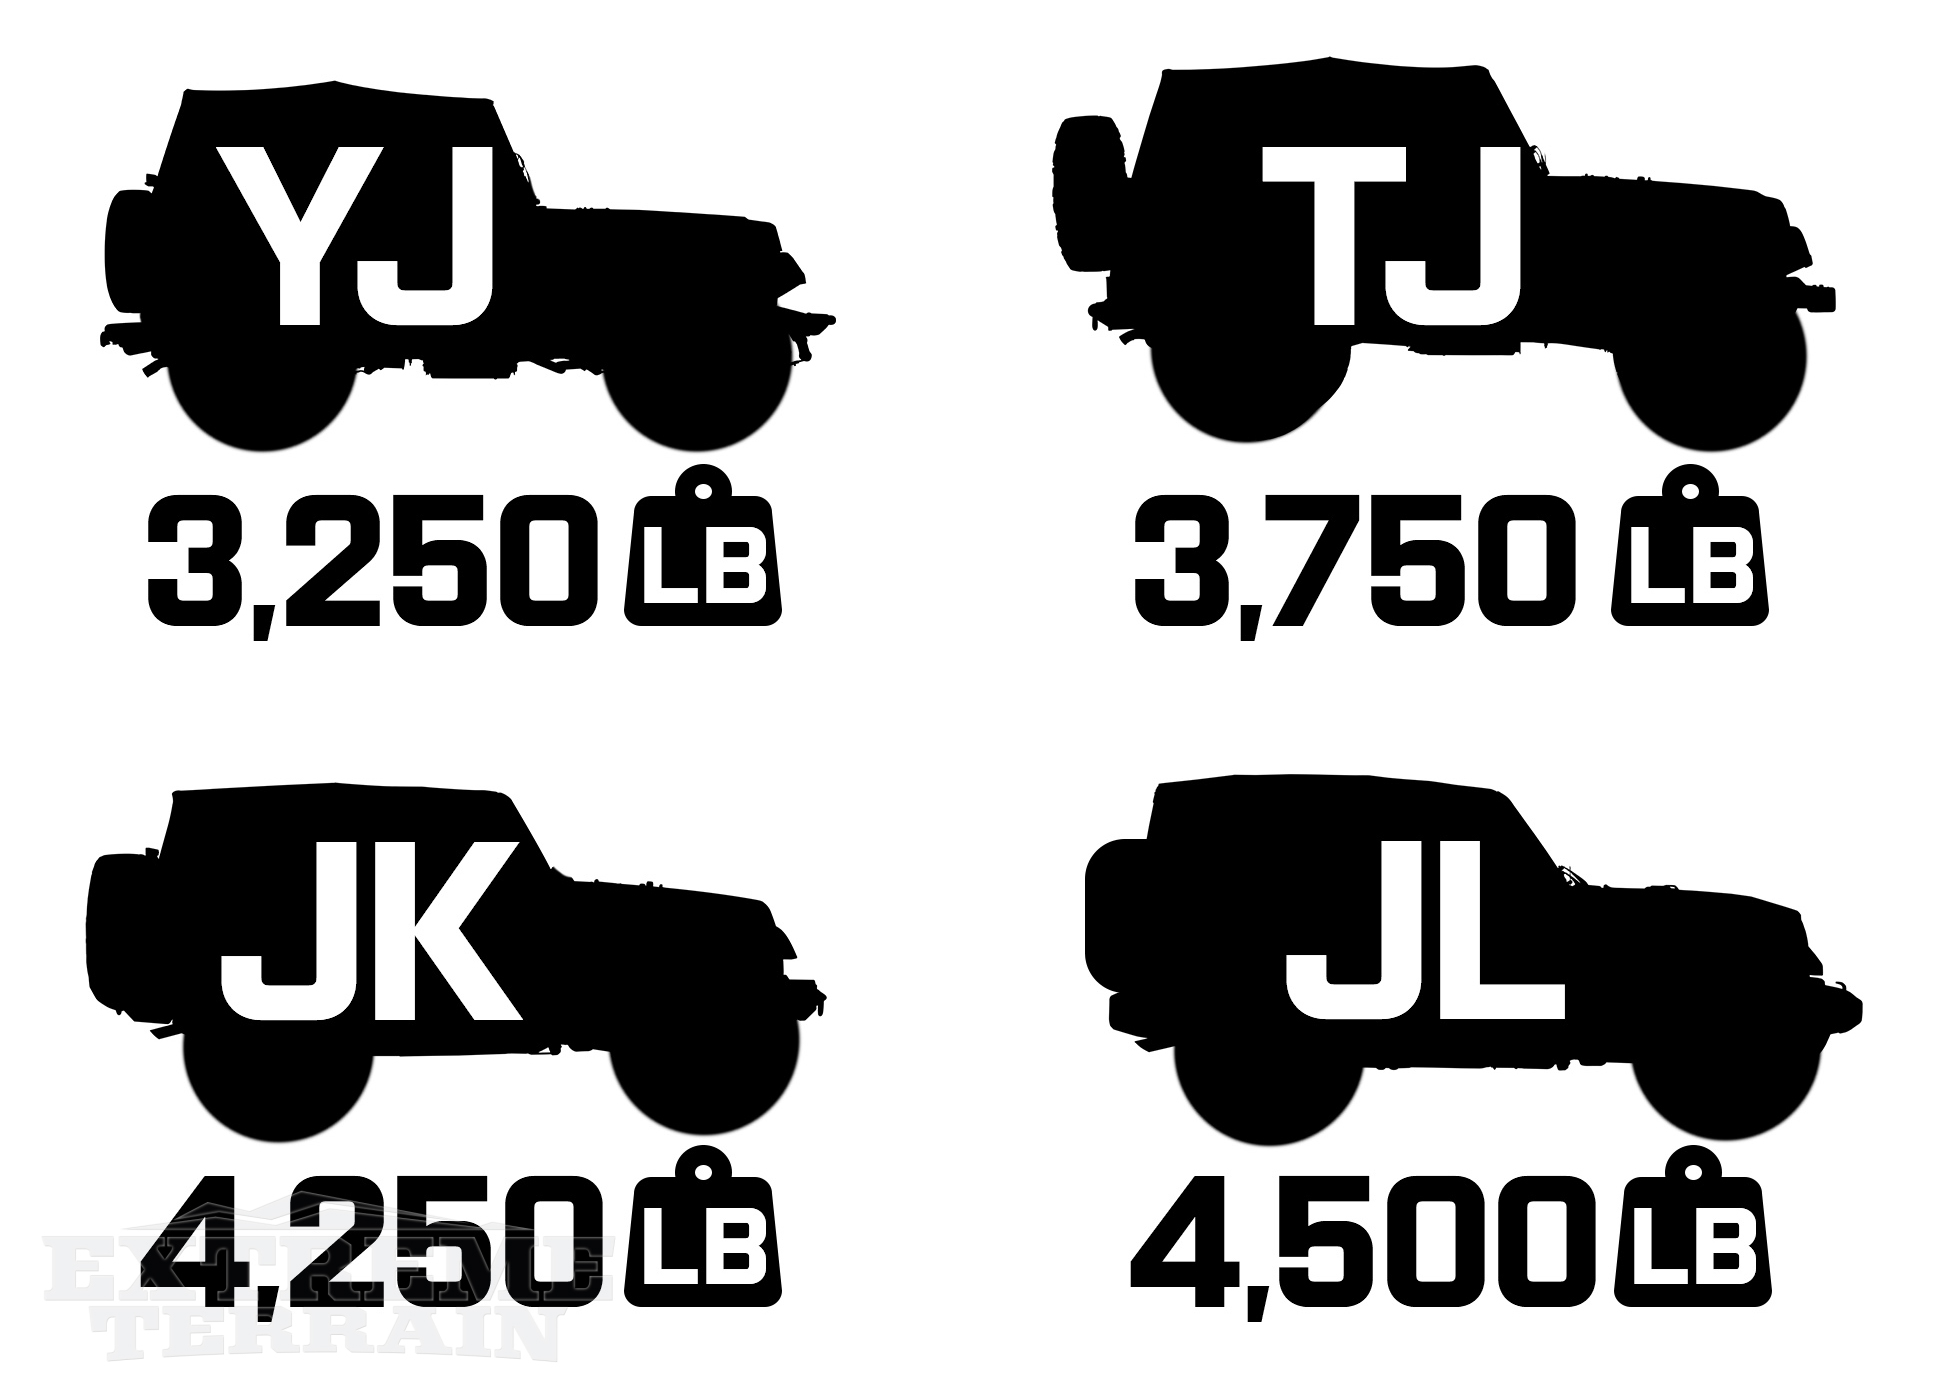 JL, JK, TJ, and YJ Wrangler Curb Weights